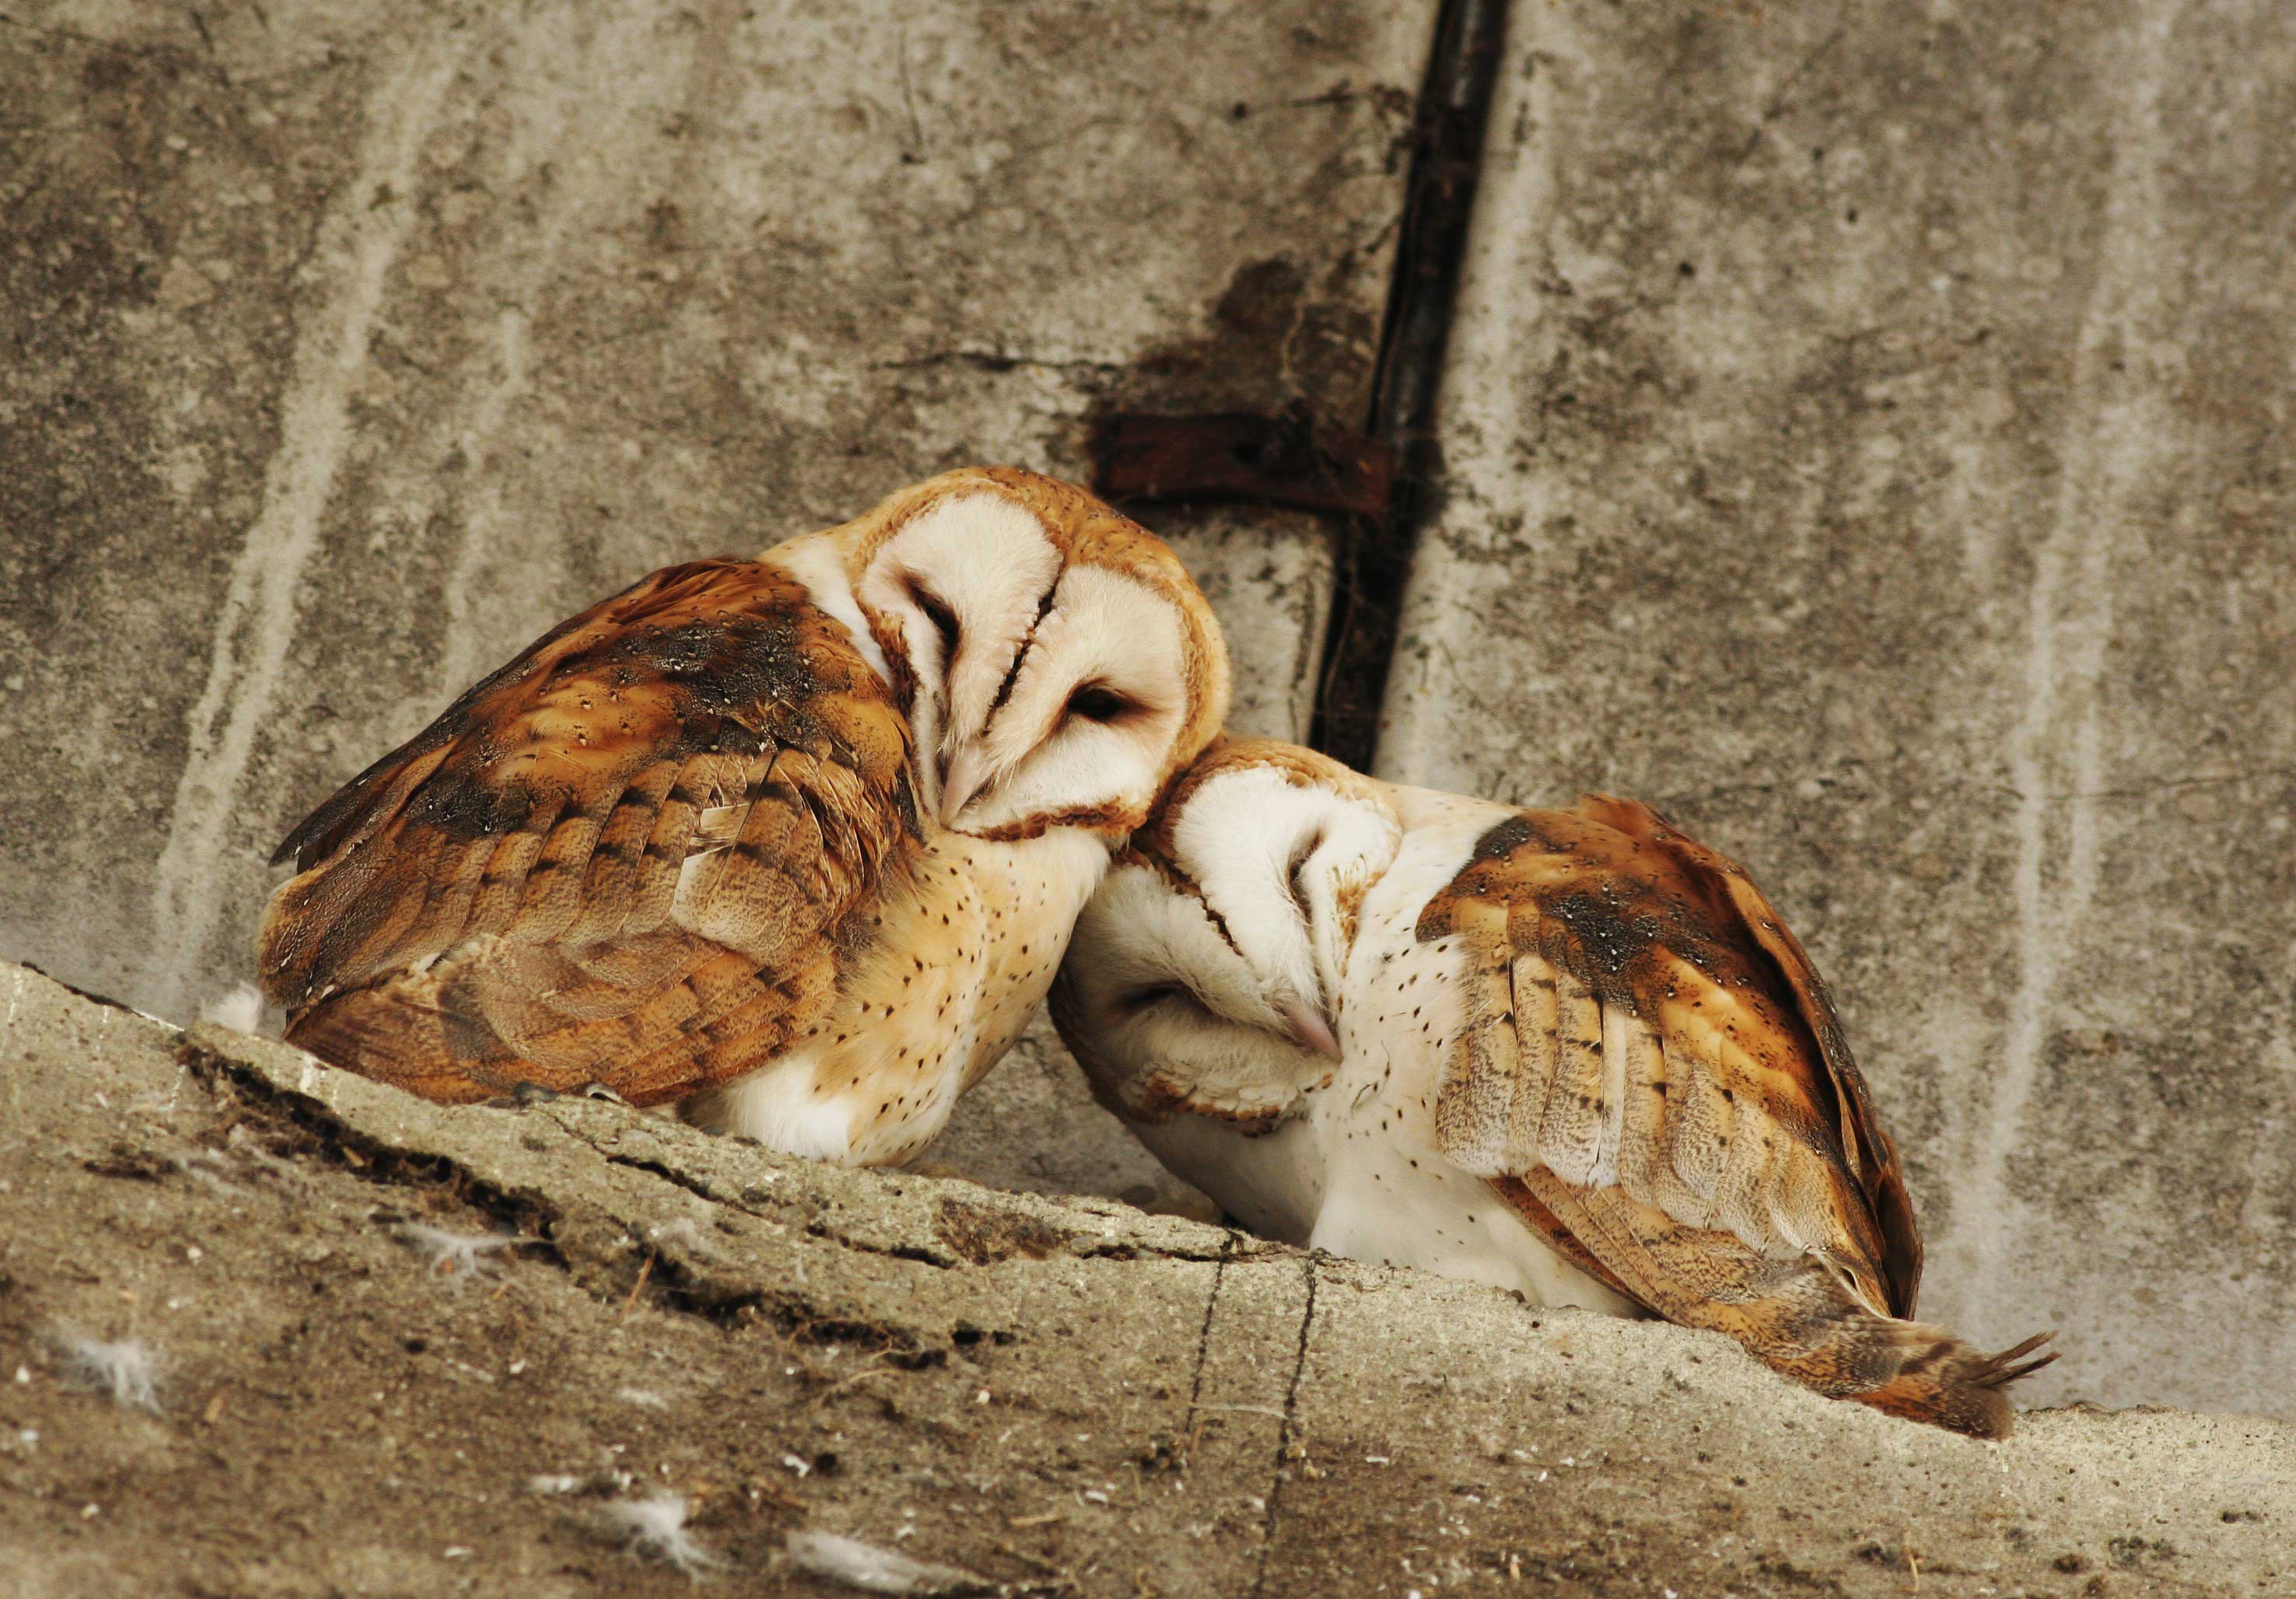 Two barn owls showing affection for each other.